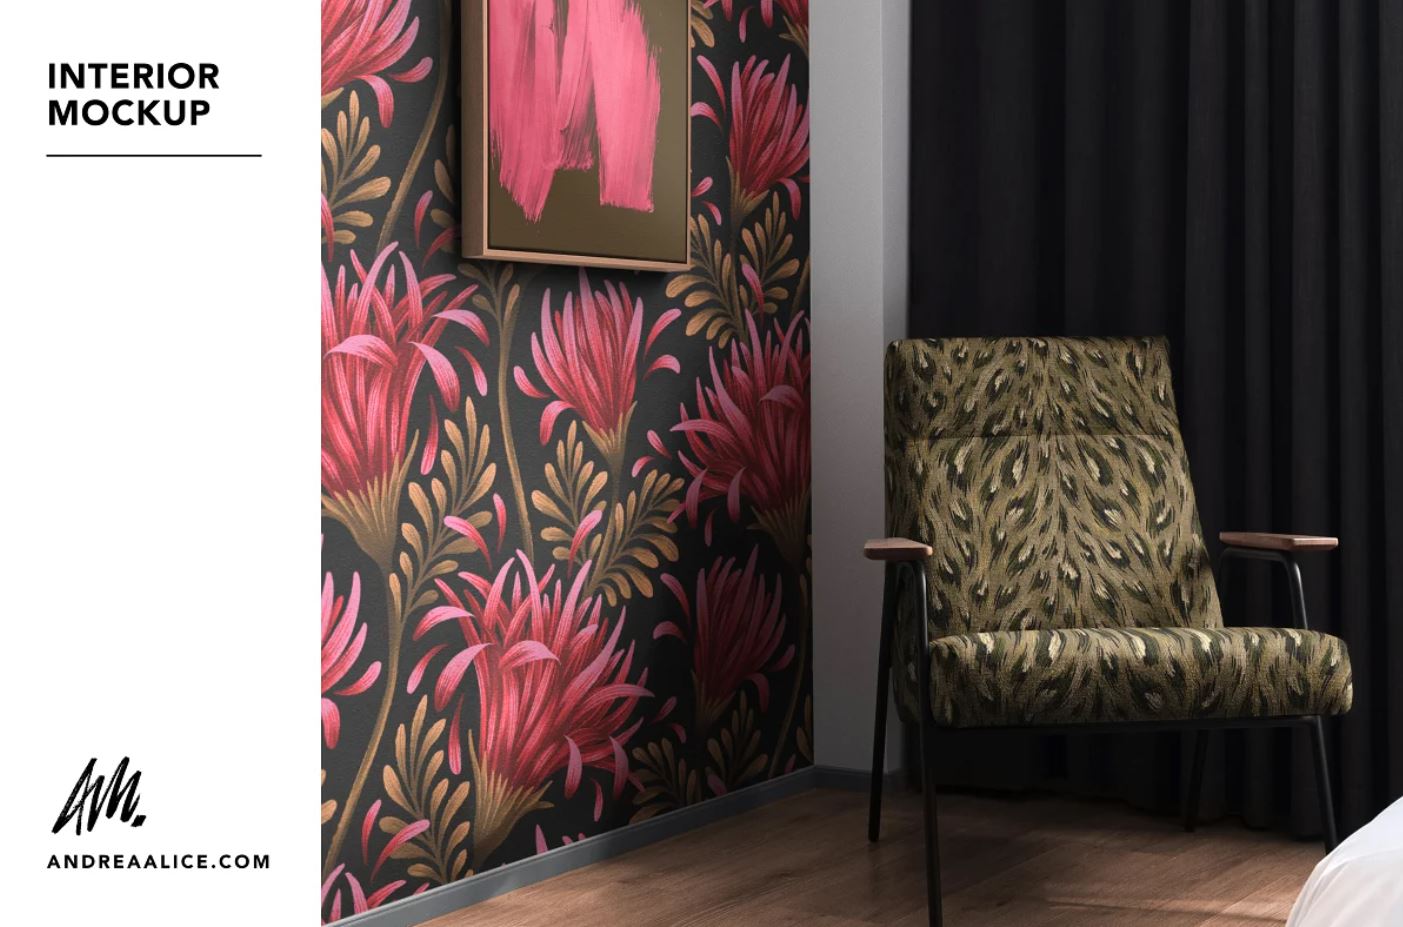 Creative Interior Room Mockup PSD for the Presentation of design on wallpaper curtain and chair